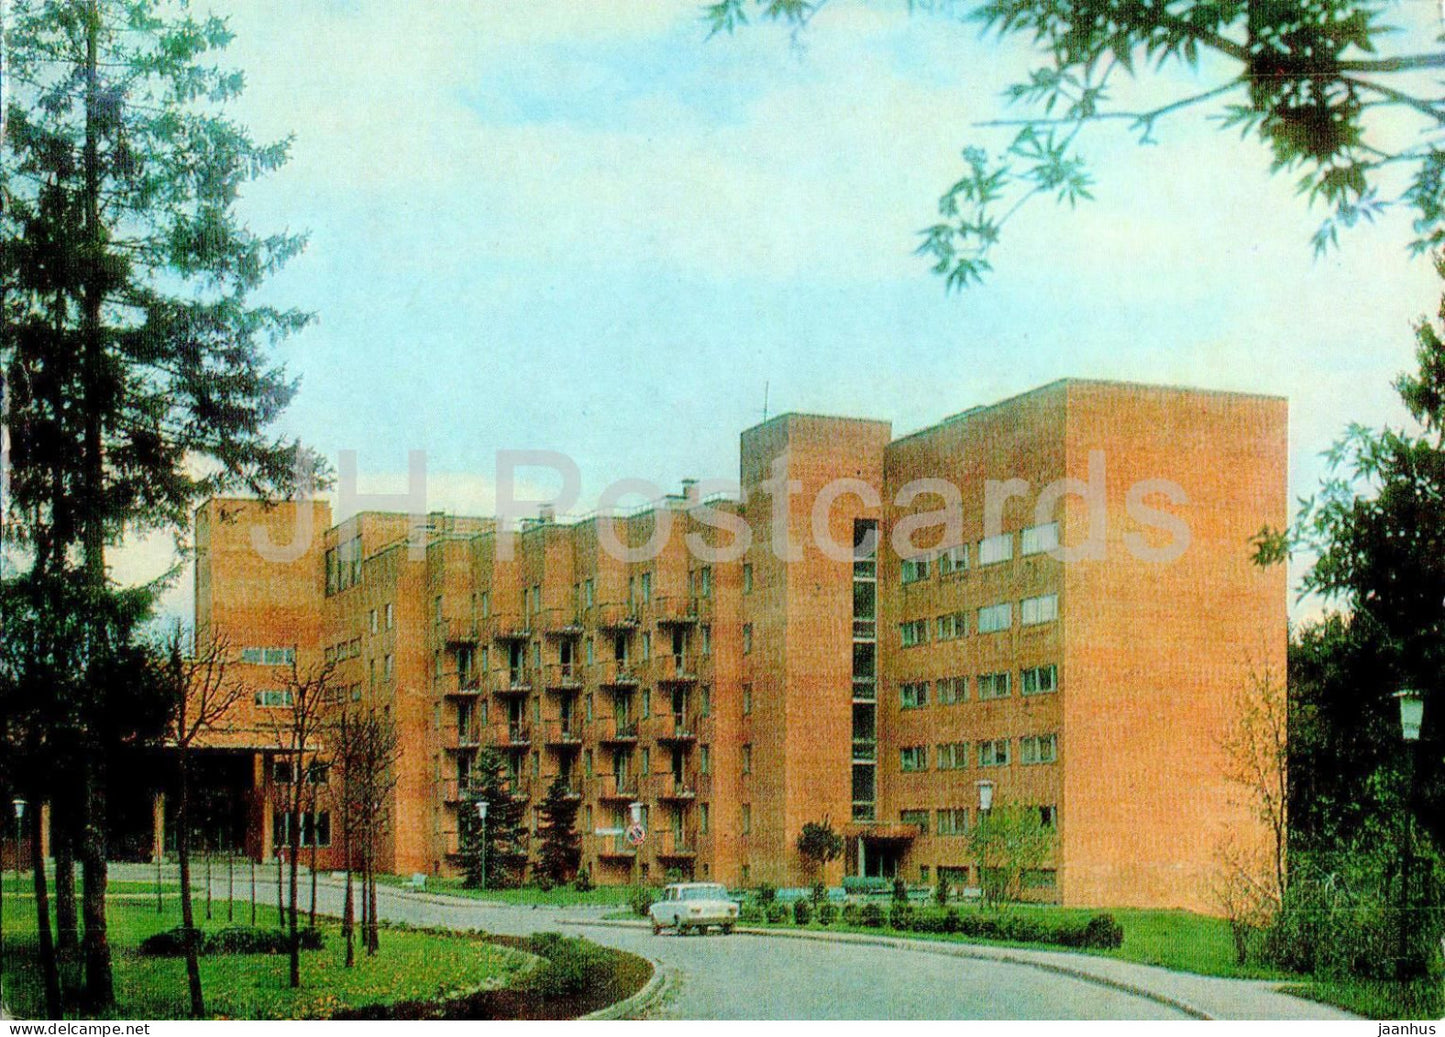 Zvenigorod - Holiday Hotel of the USSR Academy of Sciences - 1983 - Russia USSR - unused - JH Postcards